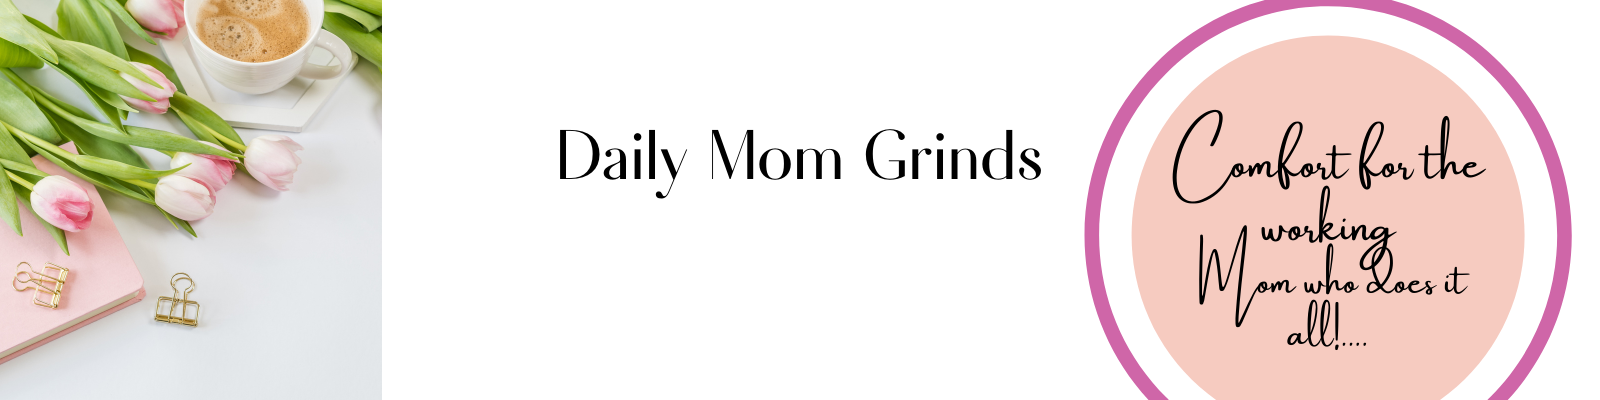 Daily Mom Grinds - Comfort For The Working Moms Who Does It All!